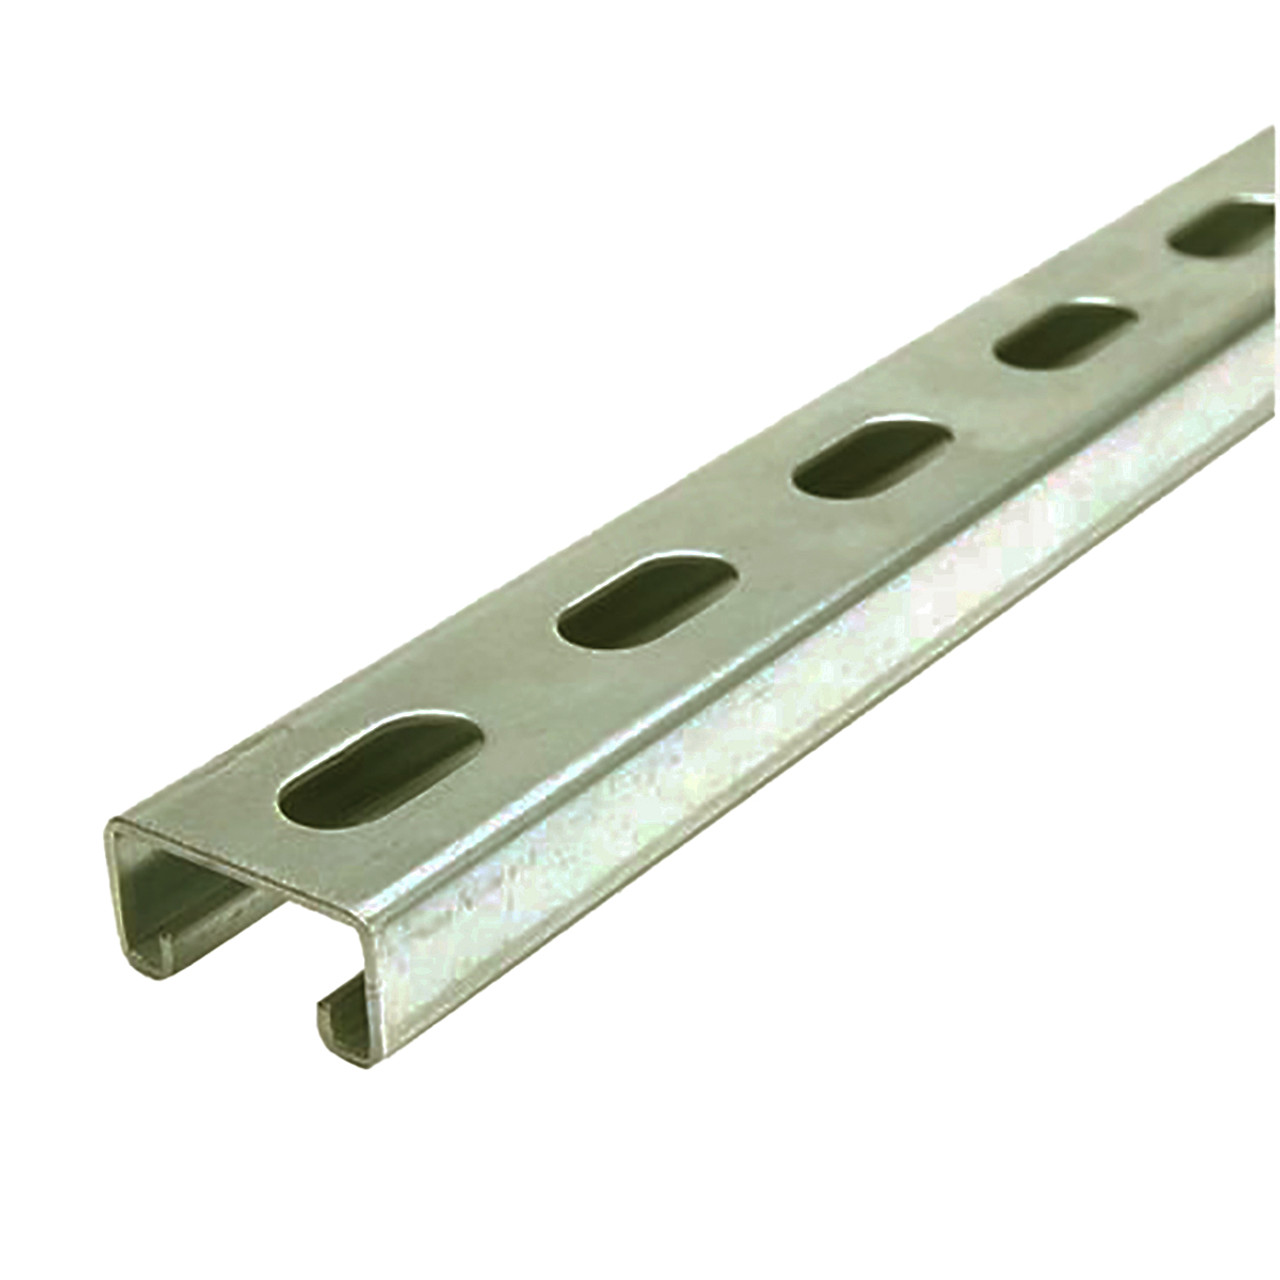 0.812" x 1.625" x 48 inches, Gold Galvanized Steel, Slotted Strut Channel, 12 ga.